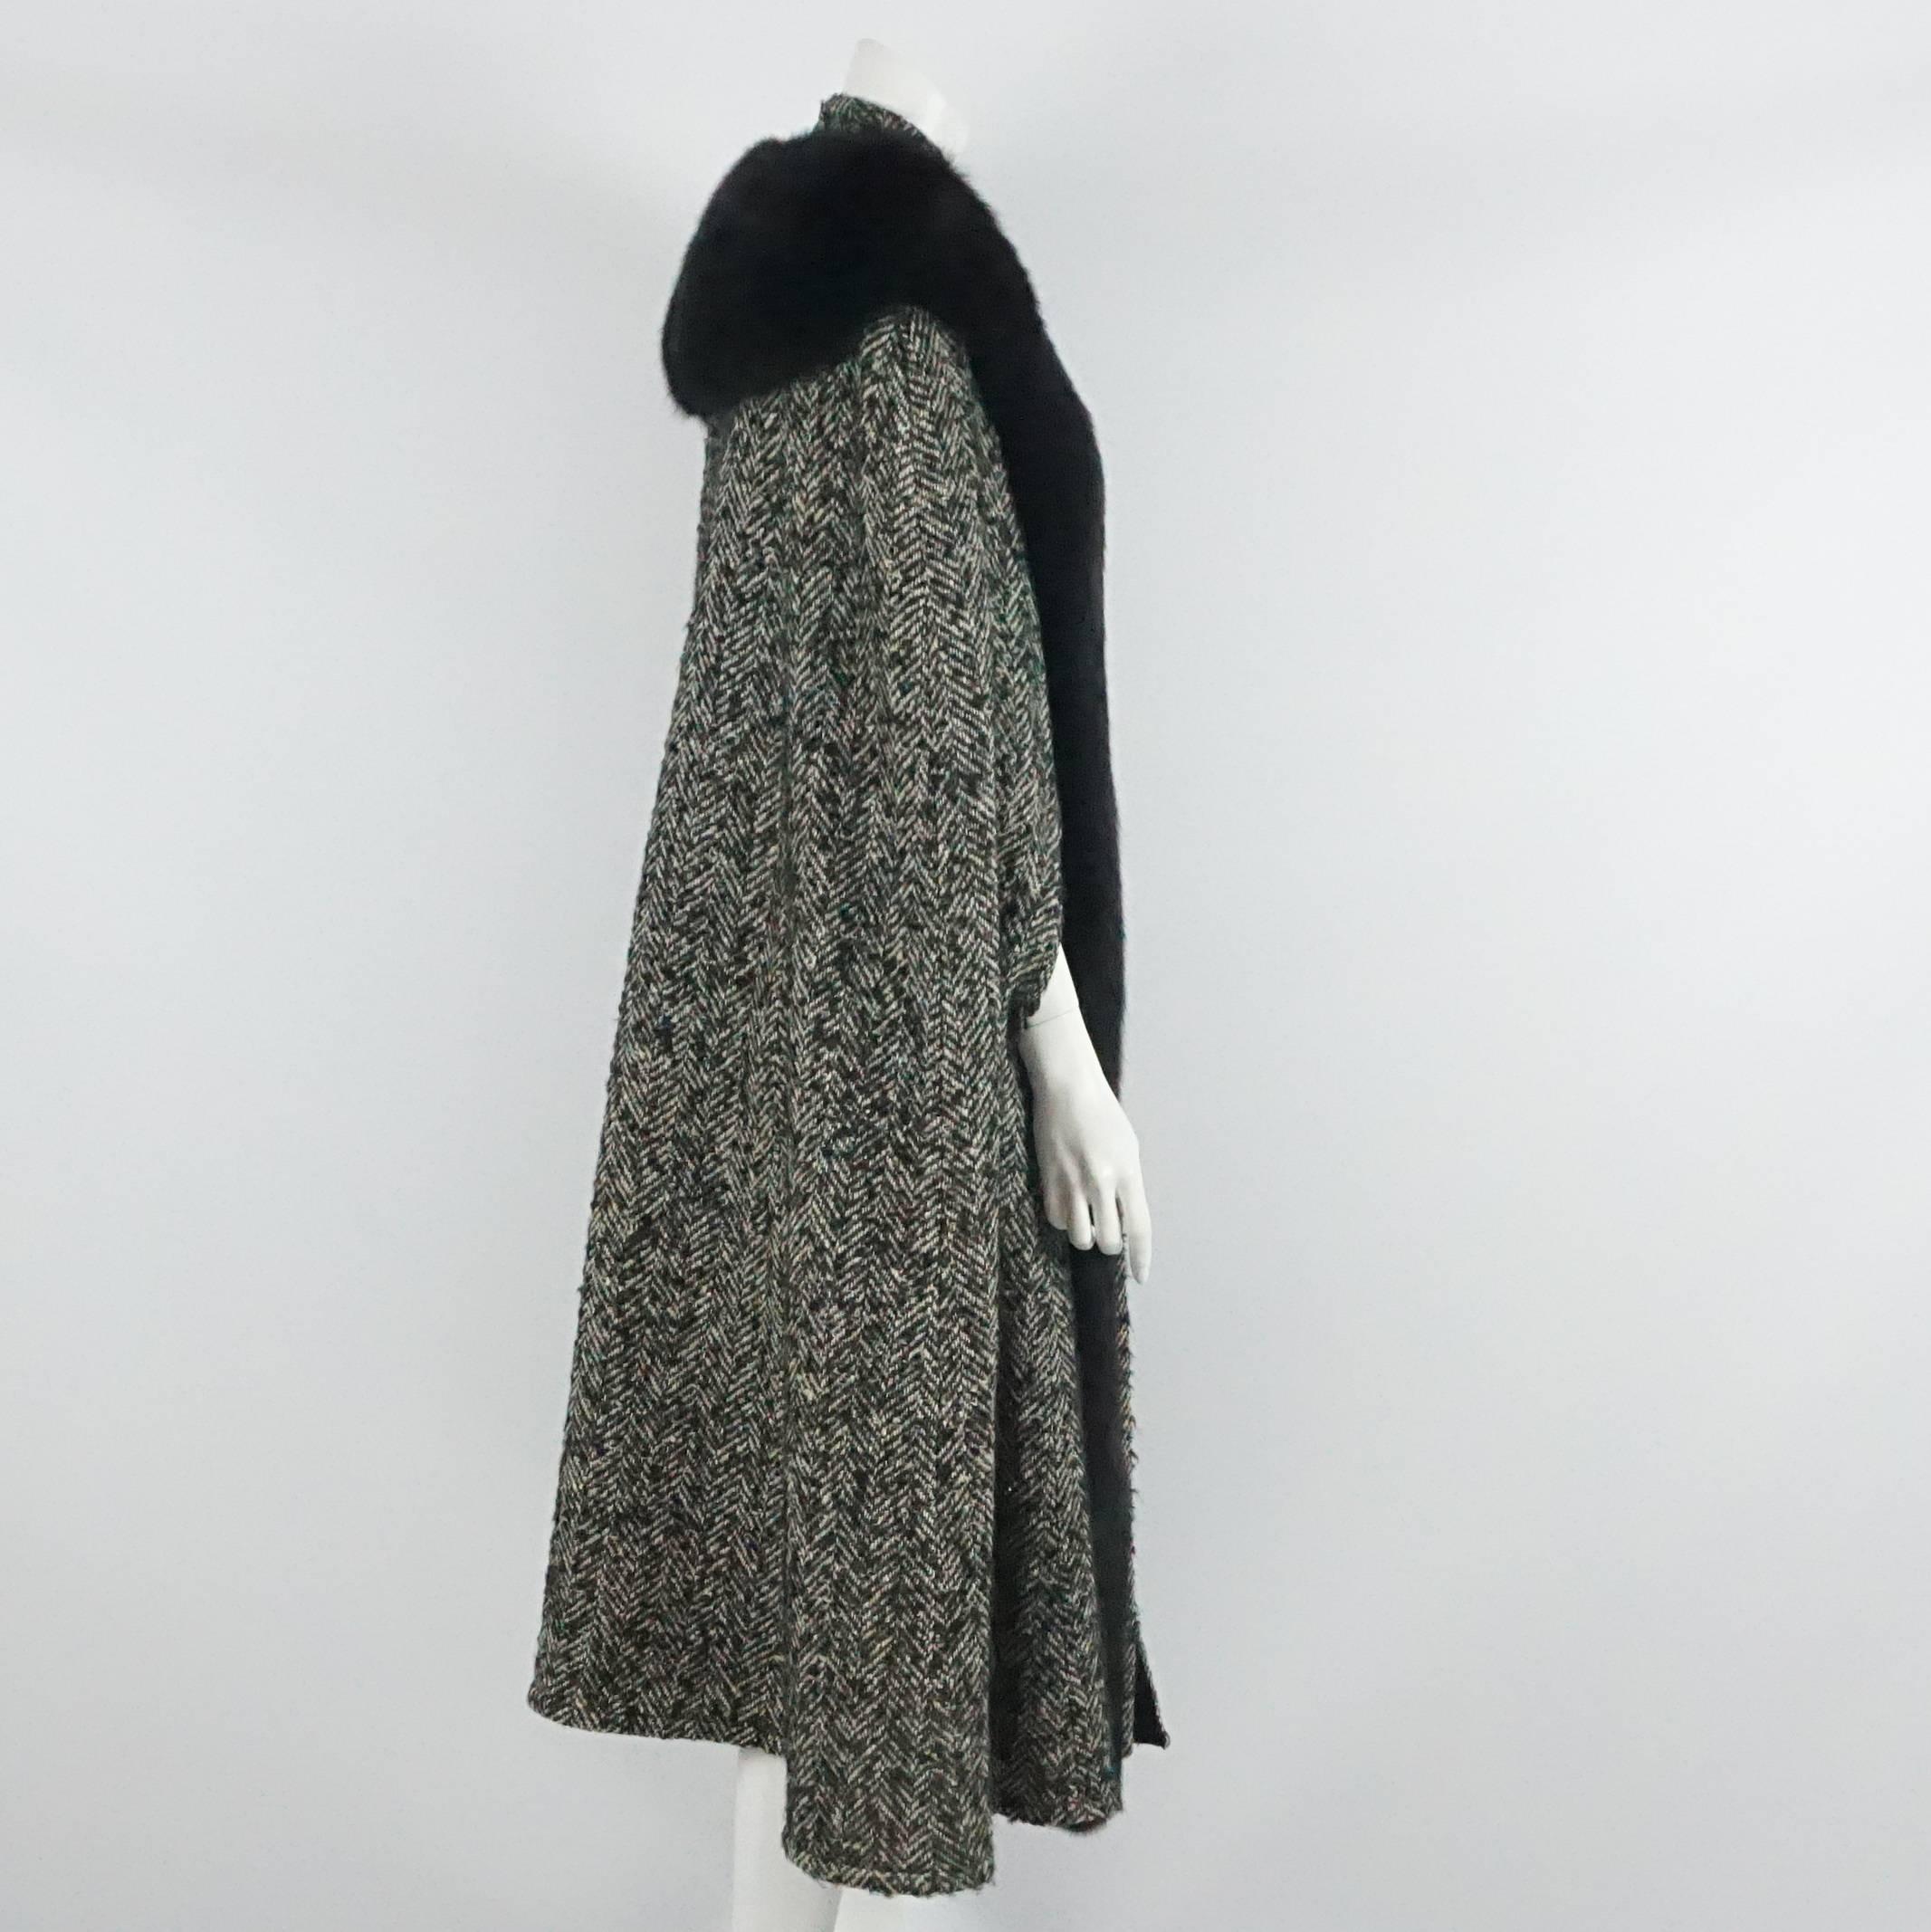 Bob Mackie Grey & White Herringbone Wool Tweed Cape w/ Black Fox Trim-10  Circa 70's  This fabulous cape is in excellent vintage condition, it has front slits for the arms to come out of, and is trimmed along the front and the back of the neck with